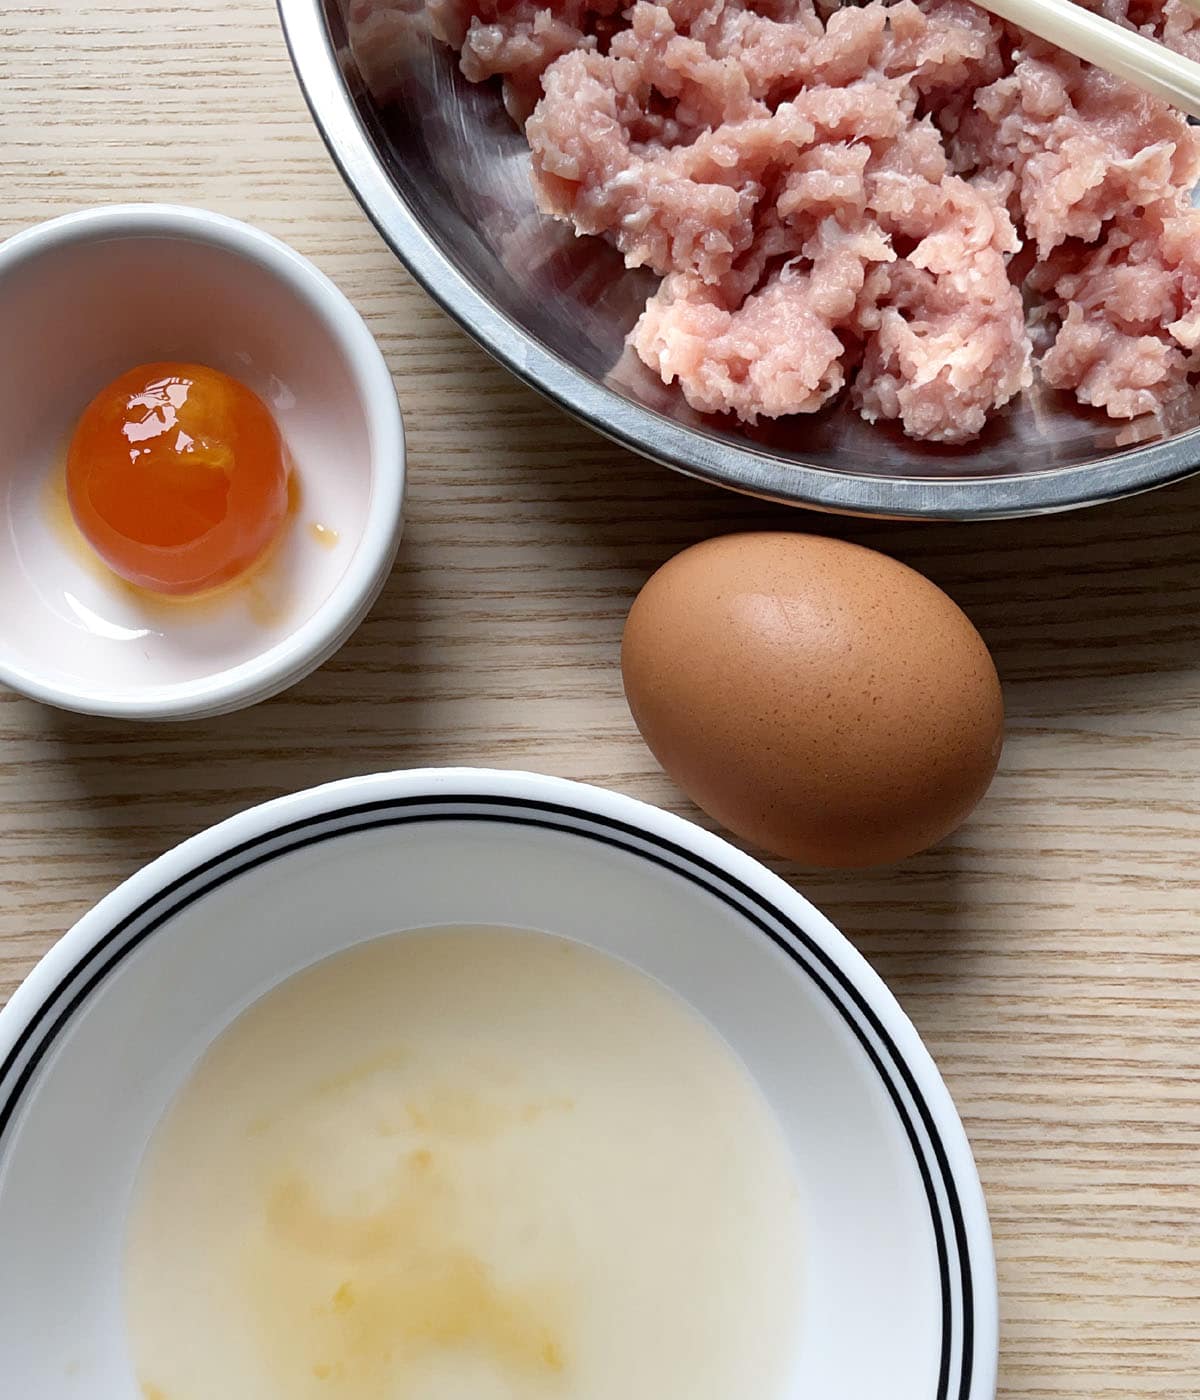 A round metal bowl containing raw pink ground meat, a white dish containing an orange egg yolk, a brown shell egg, and a white bowl containing egg white.